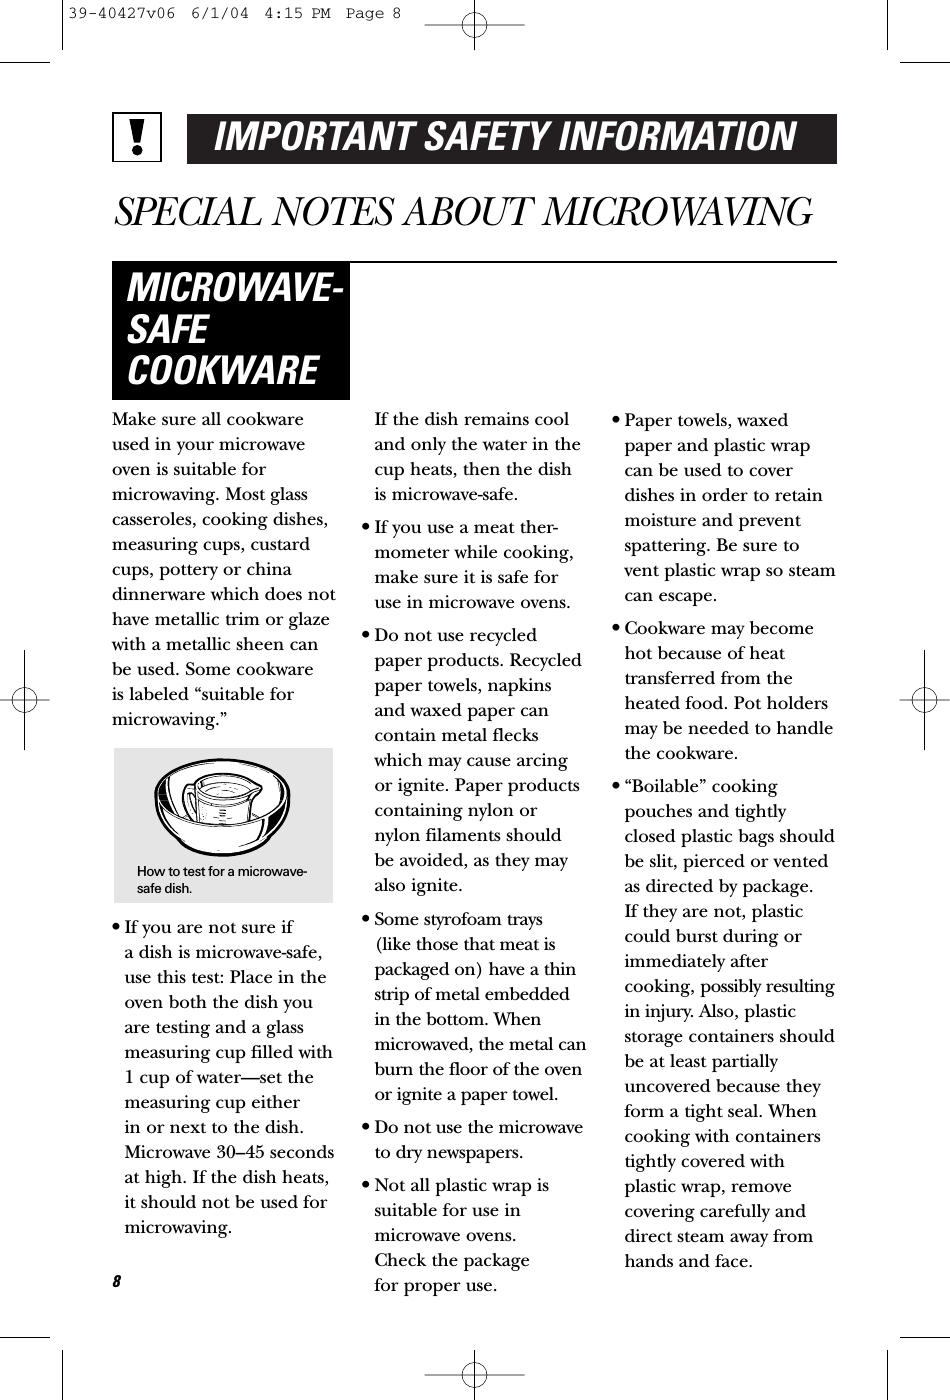 IMPORTANT SAFETY INFORMATIONSPECIAL NOTES ABOUT MICROWAVINGMake sure all cookwareused in your microwaveoven is suitable formicrowaving. Most glasscasseroles, cooking dishes,measuring cups, custardcups, pottery or chinadinnerware which does nothave metallic trim or glazewith a metallic sheen canbe used. Some cookware is labeled “suitable formicrowaving.”•If you are not sure if a dish is microwave-safe,use this test: Place in theoven both the dish youare testing and a glassmeasuring cup filled with1 cup of water—set themeasuring cup either in or next to the dish.Microwave 30–45 secondsat high. If the dish heats,it should not be used formicrowaving. If the dish remains cooland only the water in thecup heats, then the dishis microwave-safe.•If you use a meat ther-mometer while cooking,make sure it is safe foruse in microwave ovens.•Do not use recycledpaper products. Recycledpaper towels, napkinsand waxed paper cancontain metal fleckswhich may cause arcingor ignite. Paper productscontaining nylon ornylon filaments shouldbe avoided, as they mayalso ignite. •Some styrofoam trays (like those that meat ispackaged on) have a thinstrip of metal embeddedin the bottom. Whenmicrowaved, the metal canburn the floor of the ovenor ignite a paper towel.•Do not use the microwaveto dry newspapers.•Not all plastic wrap issuitable for use in microwave ovens. Check the package for proper use.•Paper towels, waxedpaper and plastic wrapcan be used to coverdishes in order to retainmoisture and preventspattering. Be sure tovent plastic wrap so steamcan escape.•Cookware may becomehot because of heattransferred from theheated food. Pot holdersmay be needed to handlethe cookware.•“Boilable” cookingpouches and tightlyclosed plastic bags shouldbe slit, pierced or ventedas directed by package. If they are not, plasticcould burst during orimmediately aftercooking, possibly resultingin injury. Also, plasticstorage containers shouldbe at least partiallyuncovered because theyform a tight seal. Whencooking with containerstightly covered withplastic wrap, removecovering carefully anddirect steam away fromhands and face.MICROWAVE-SAFECOOKWARE8How to test for a microwave-safe dish.39-40427v06  6/1/04  4:15 PM  Page 8